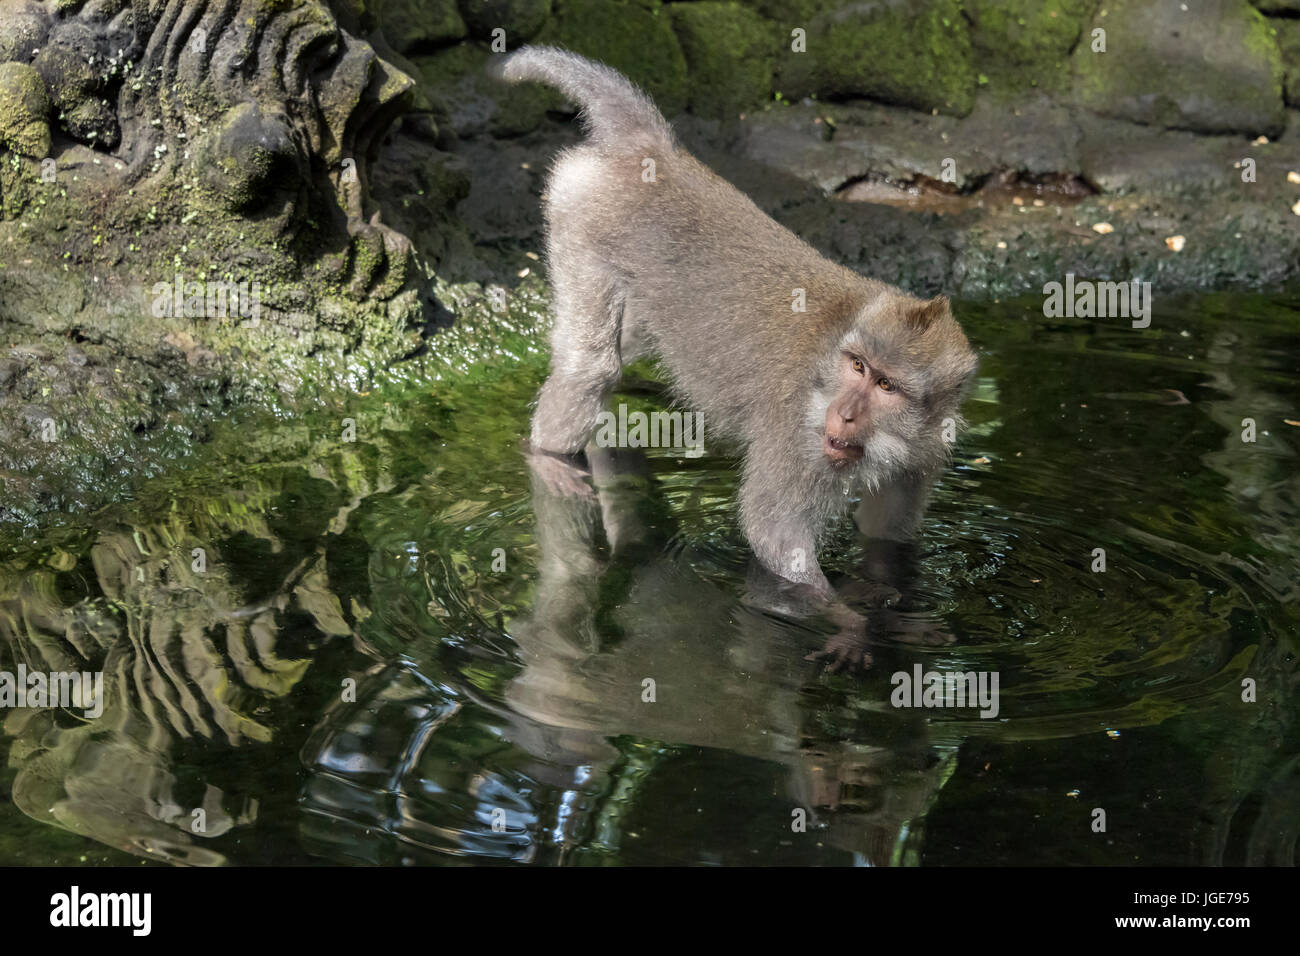 Crab-eating macaque foraging in a pond, Monkey Forest, Ubud, Bali Stock Photo